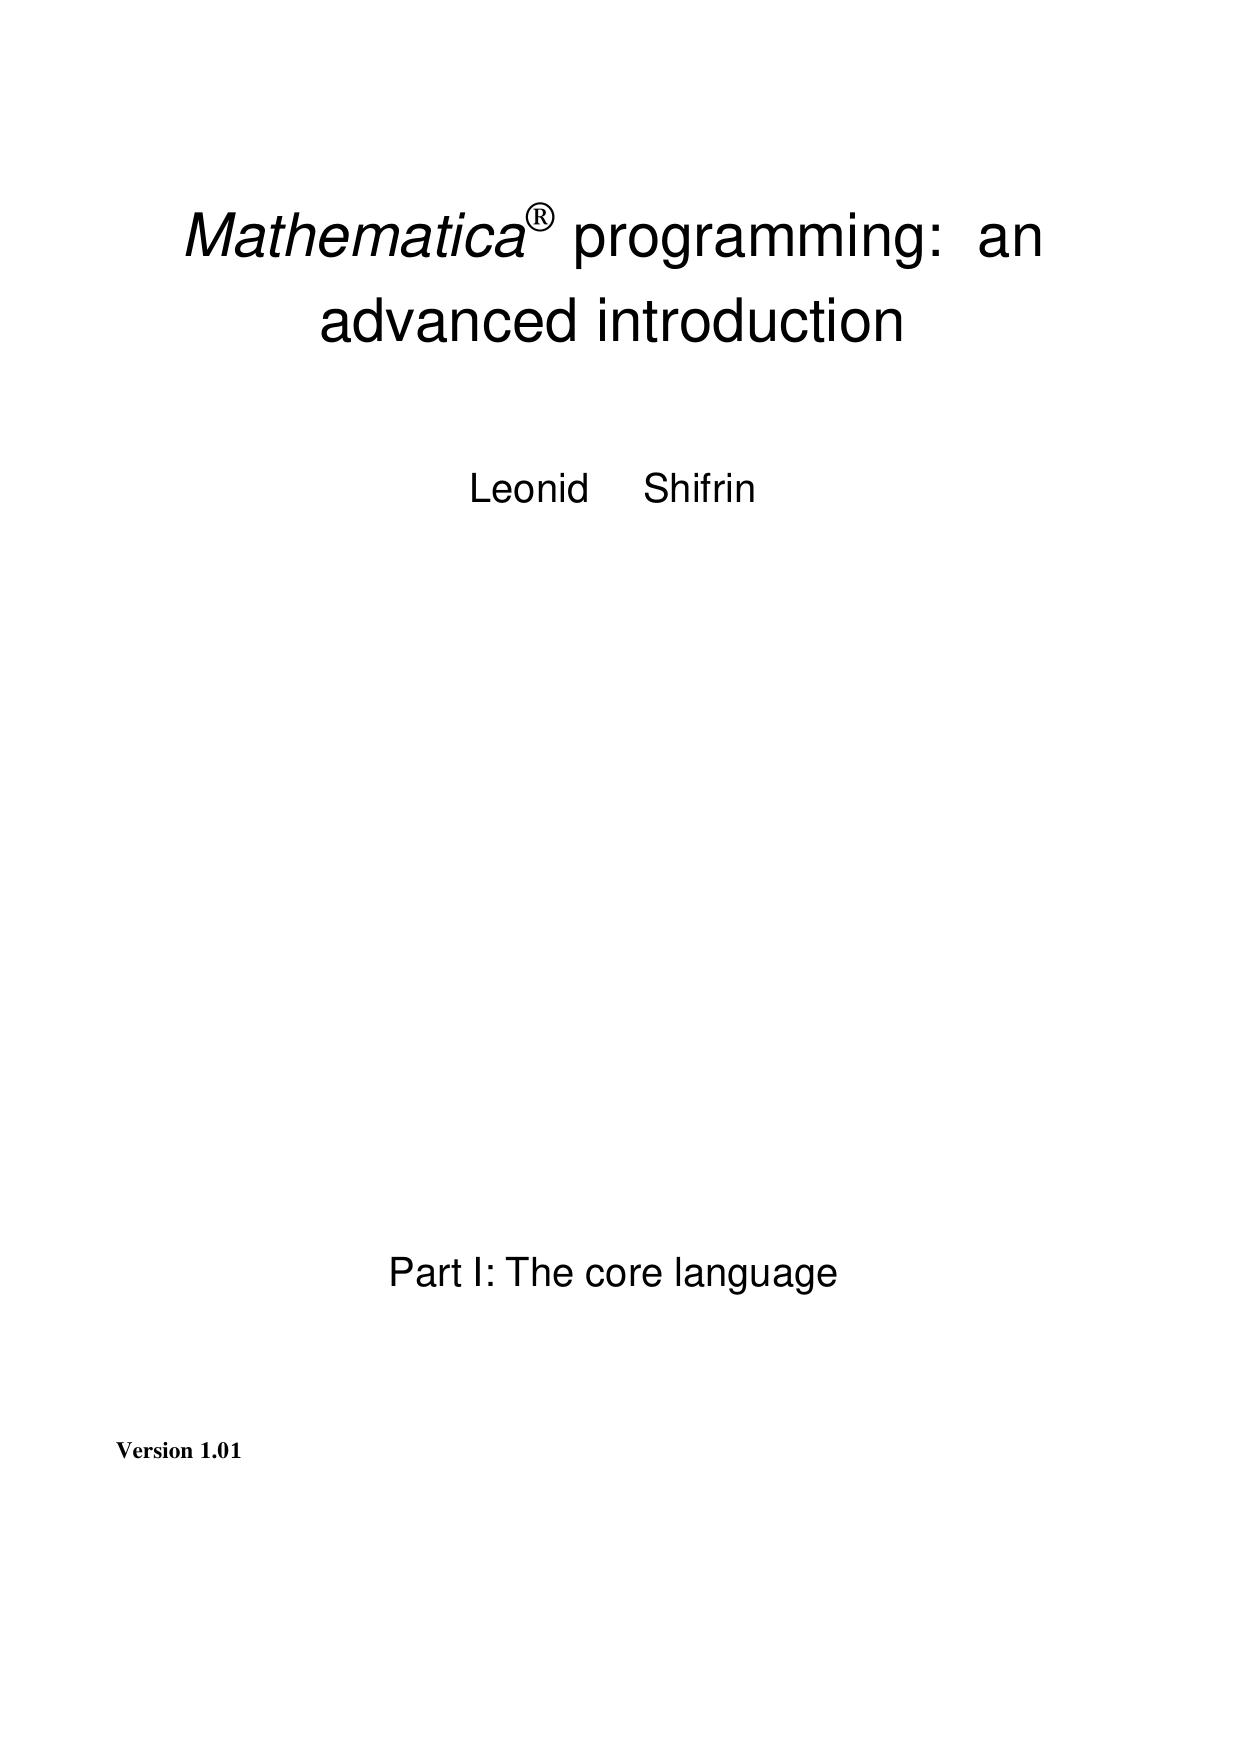 Mathematica® programming an advanced introduction by Leonid Shifrin